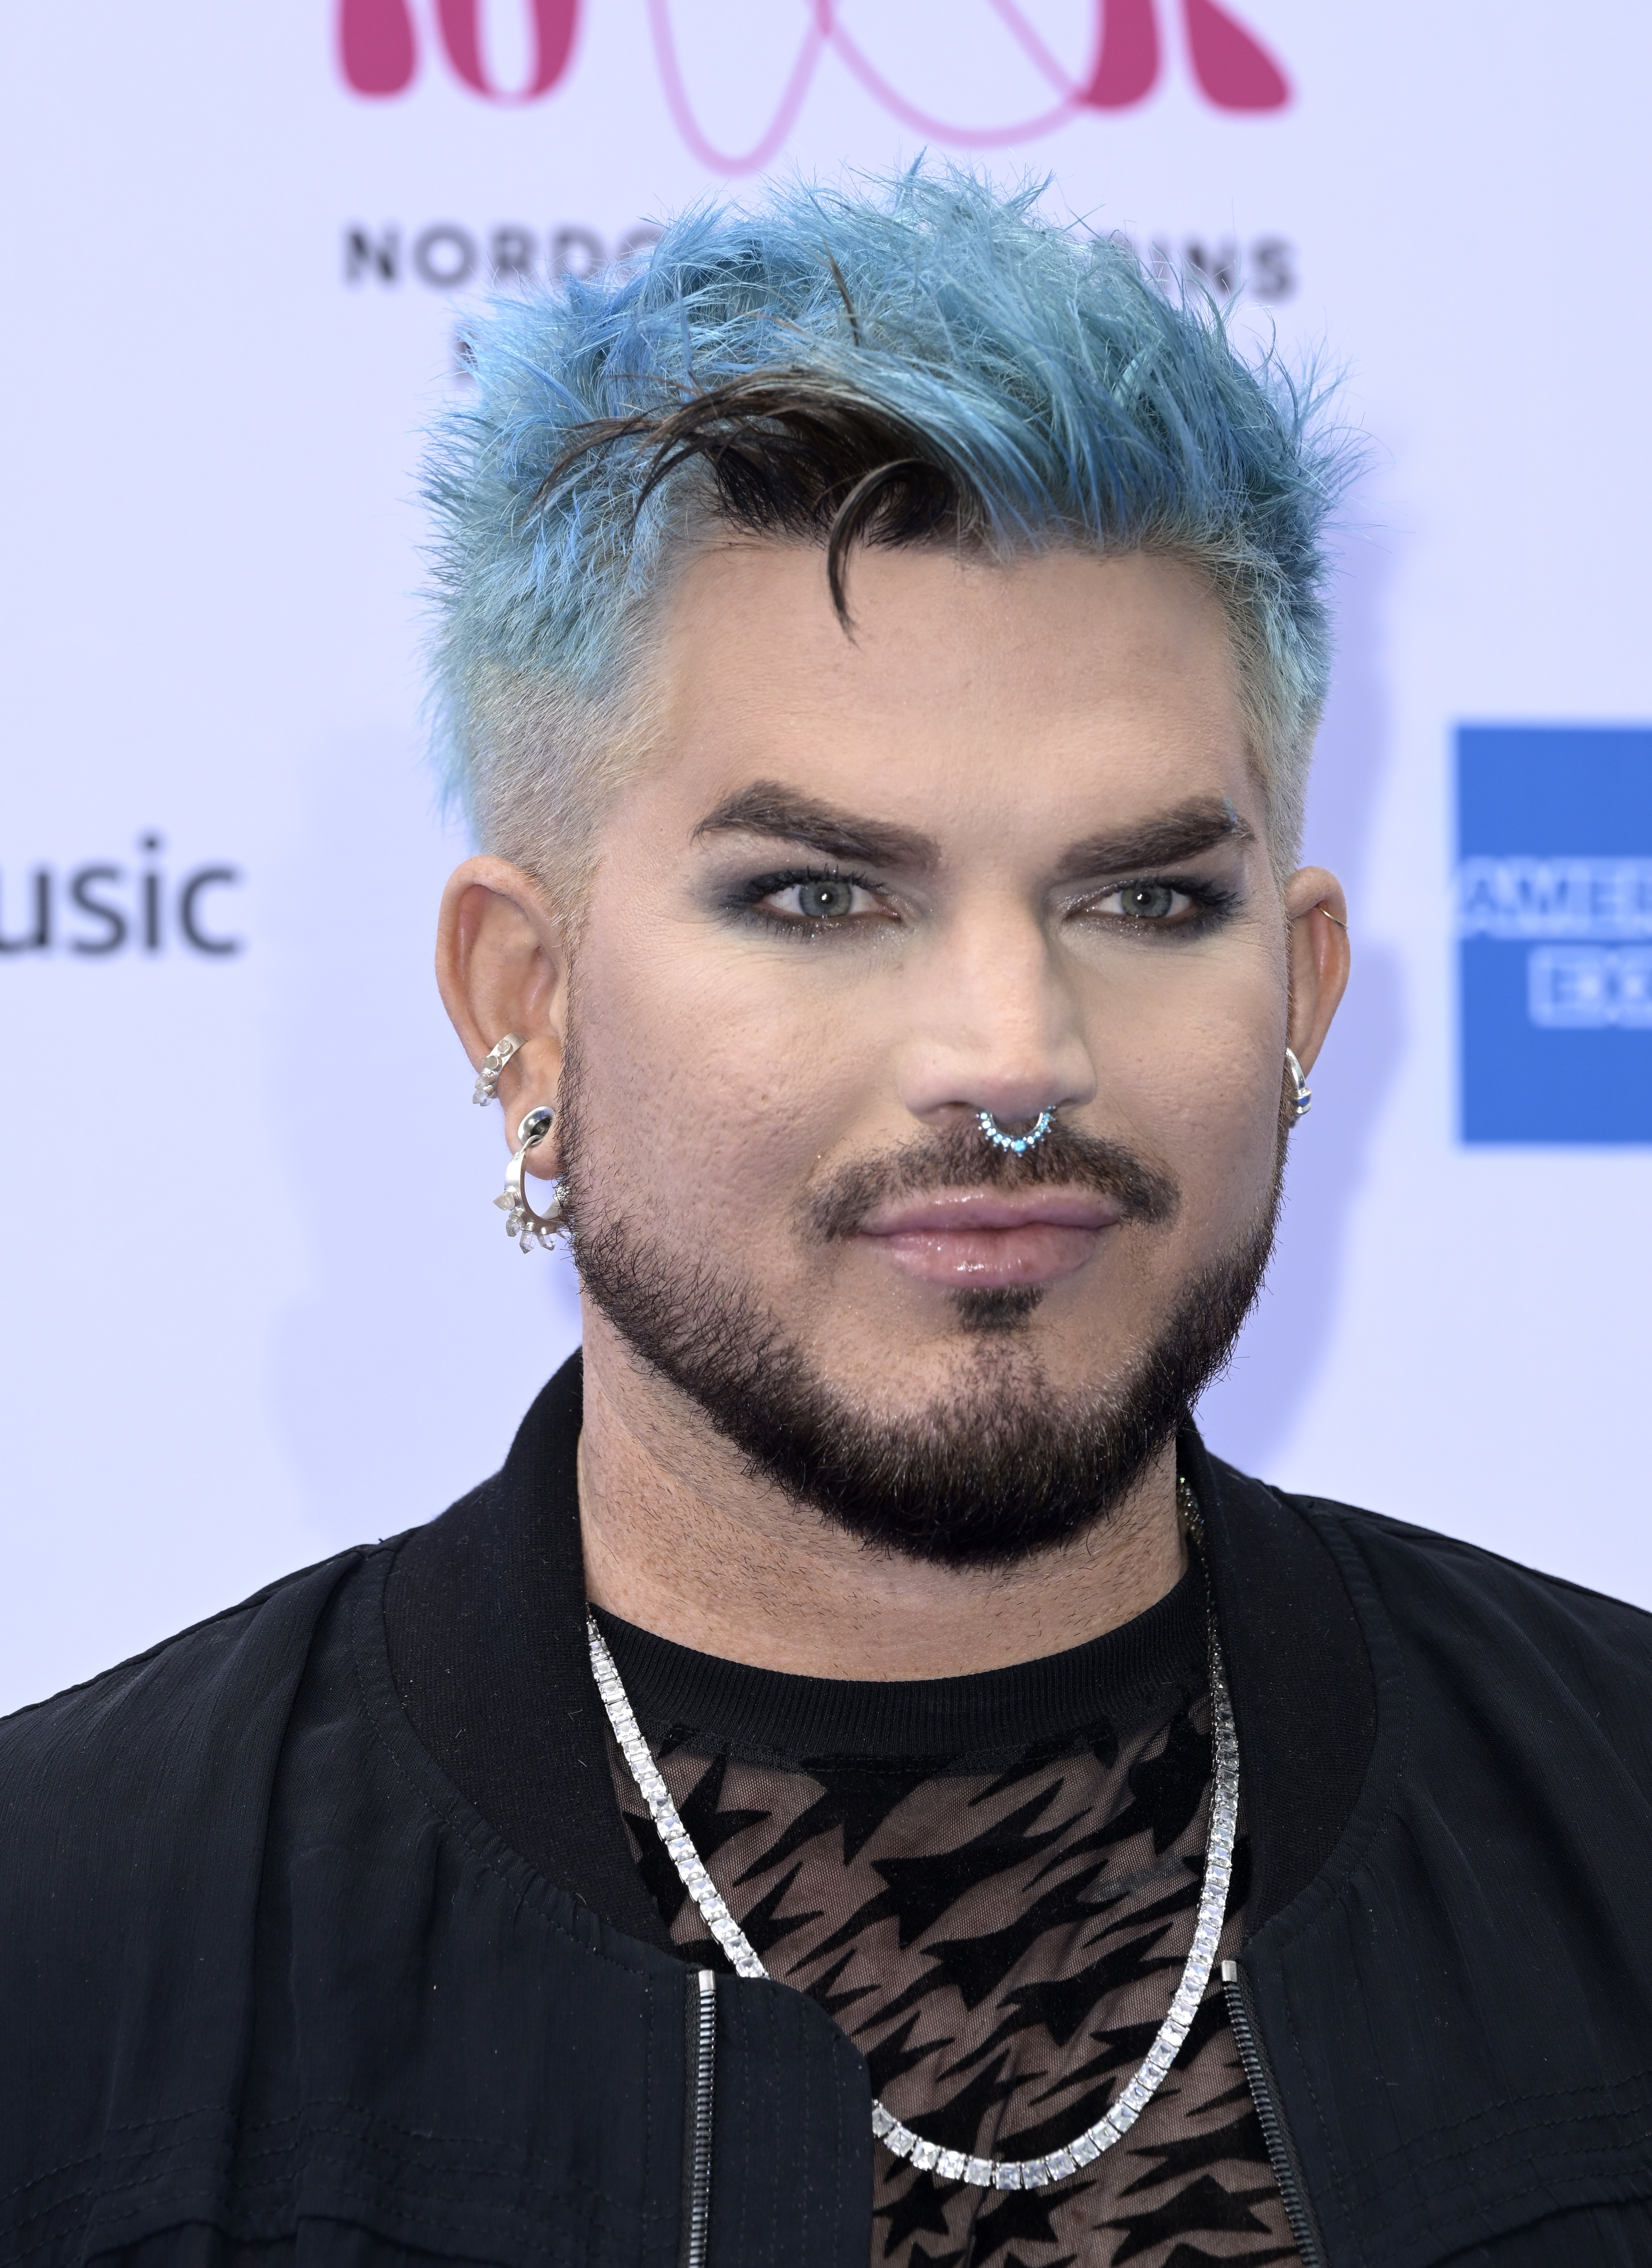 Adam Lambert's 'For Your Entertainment': How It Rates, Track by Track